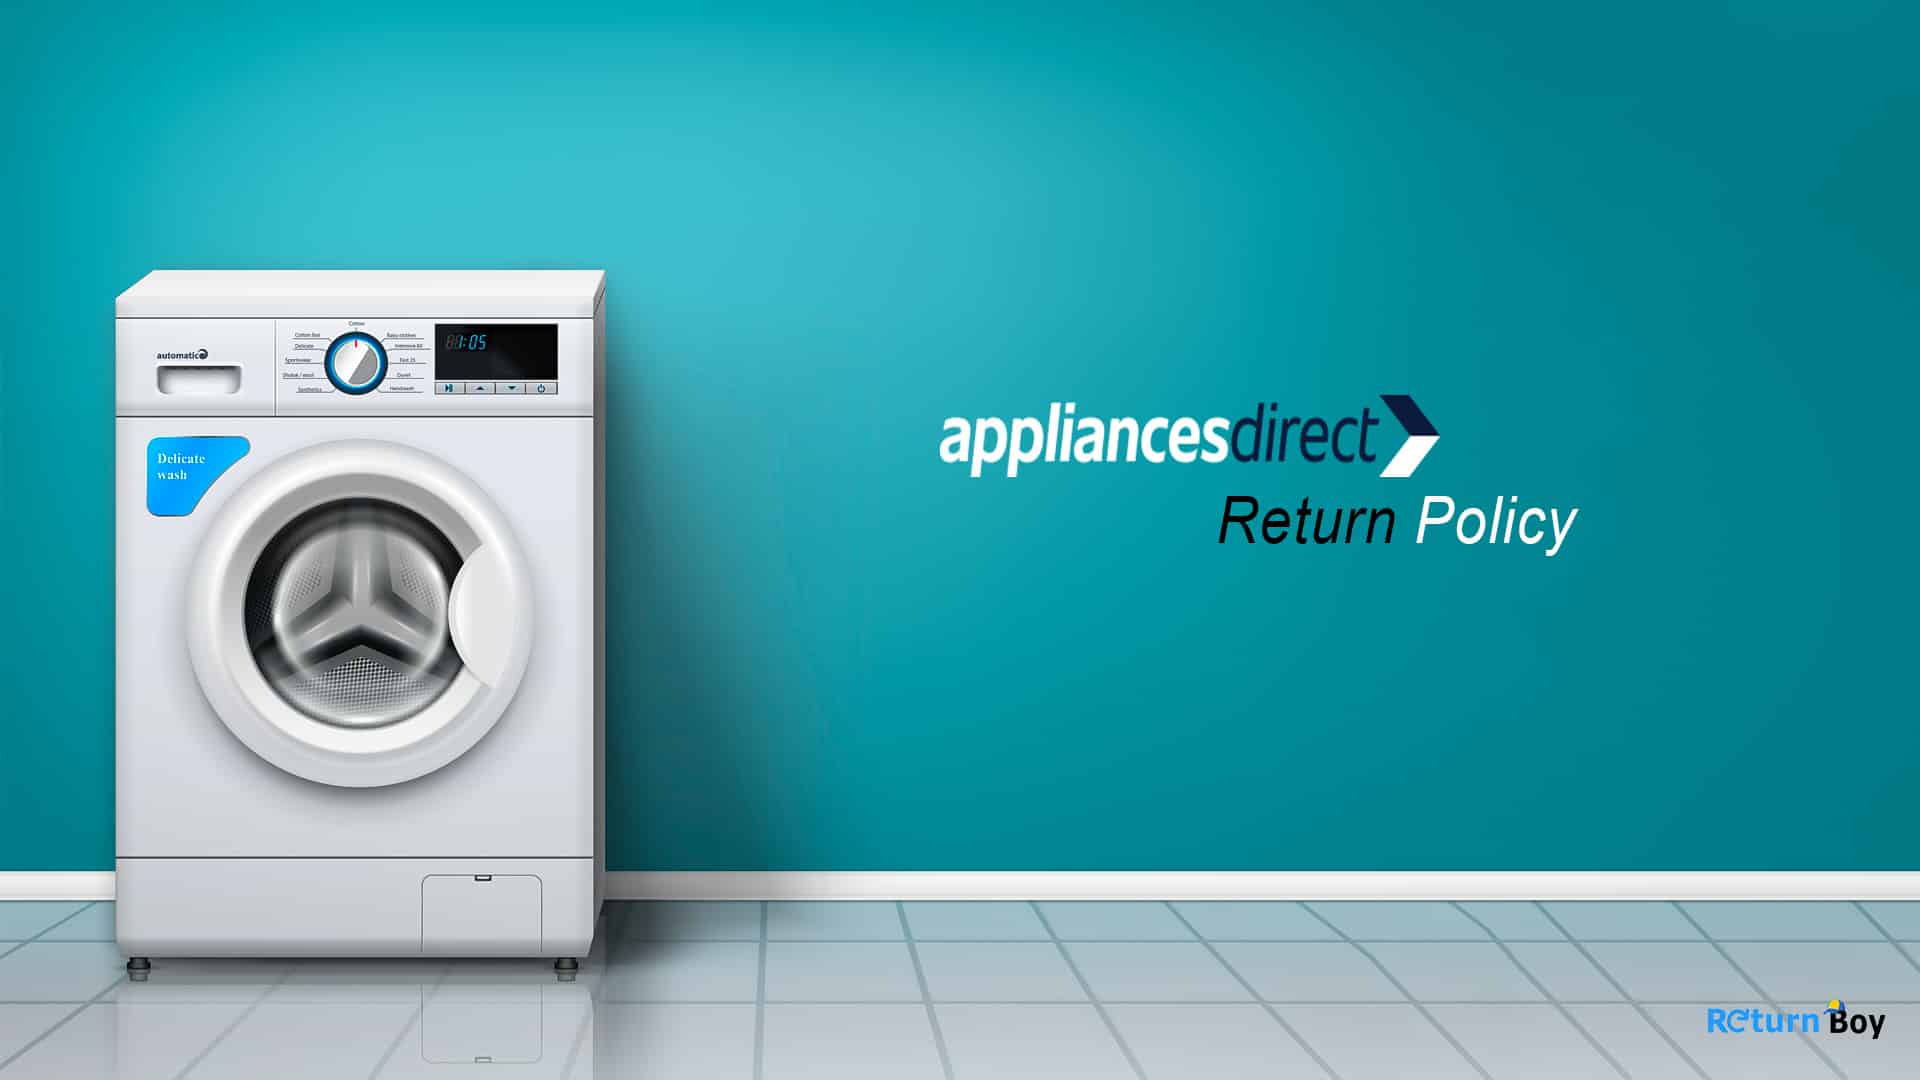 Appliances Direct Return Policy